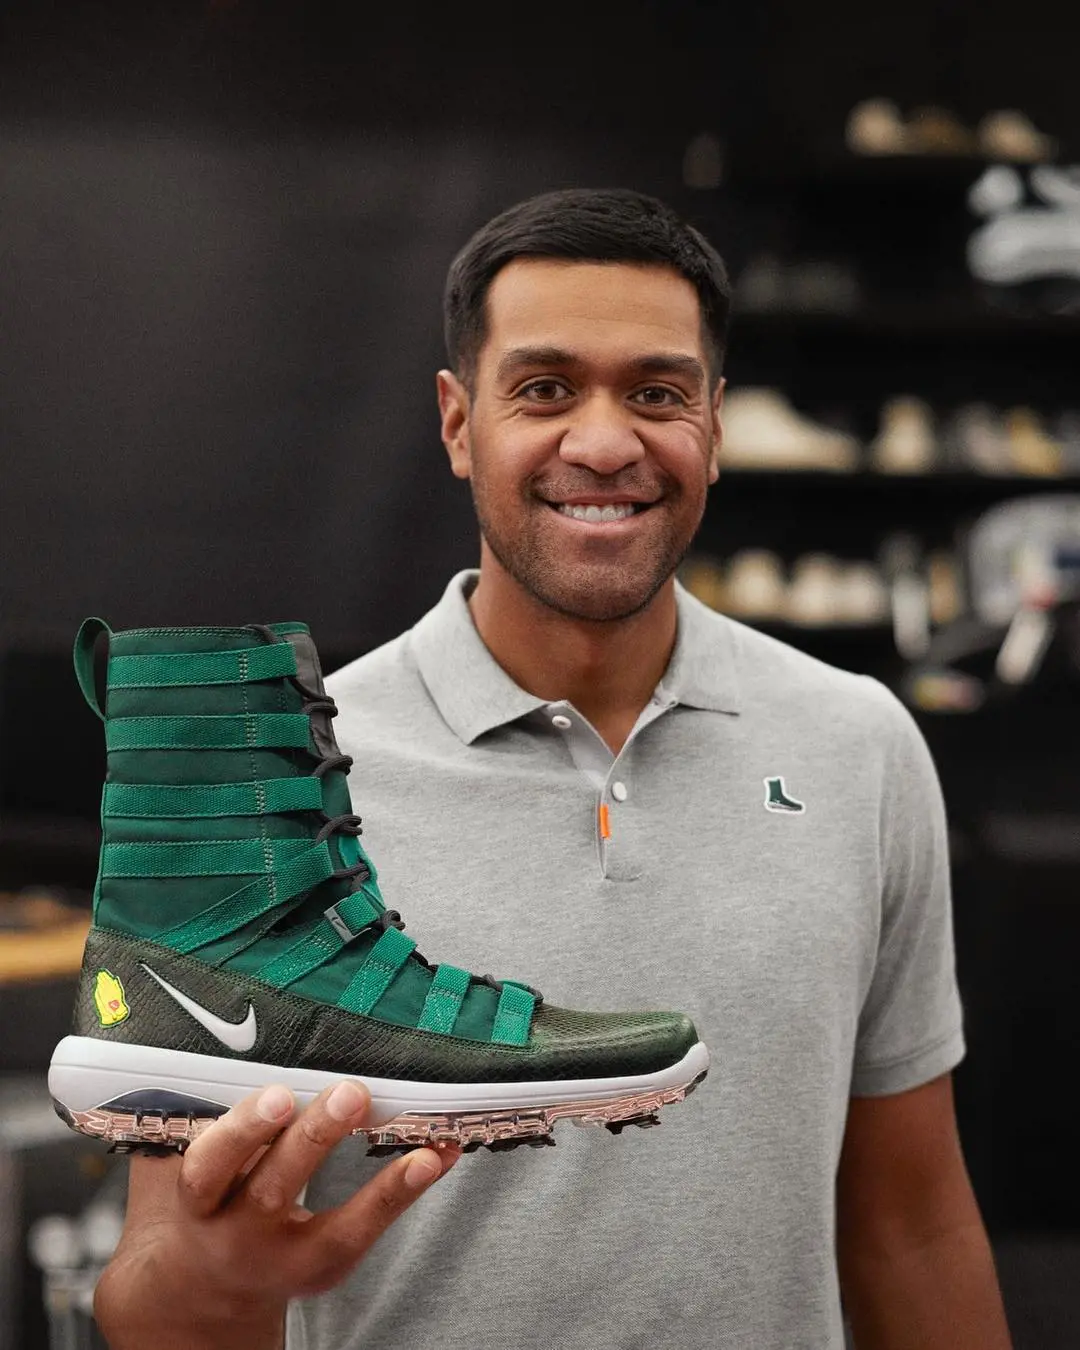 Tony's signature Nike shoe launched in April 2019